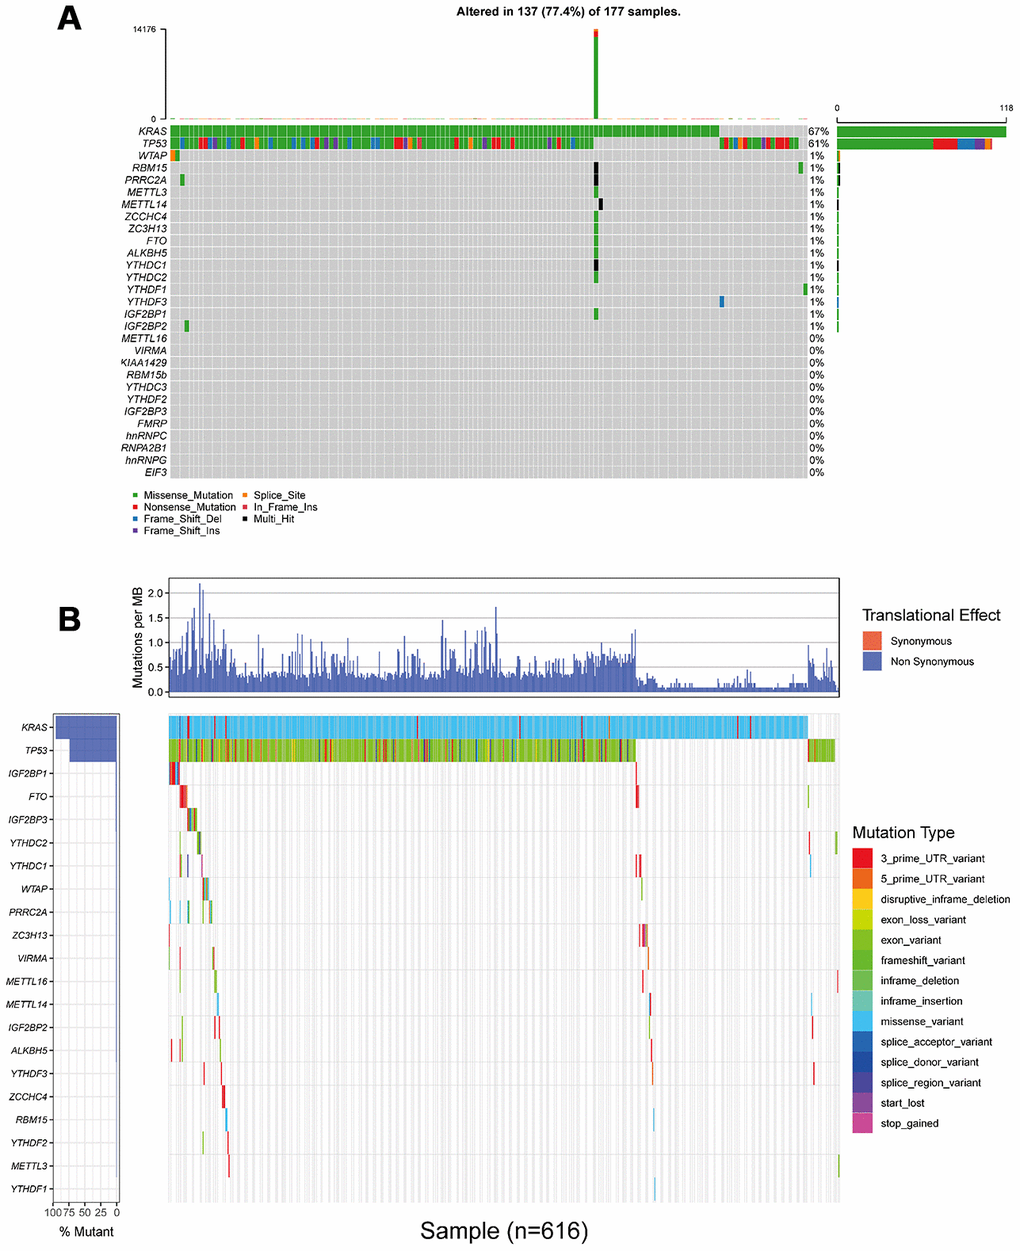 Landscape of somatic mutation status of m6A regulators in PAAD. (A) The mutation frequency of 24 m6A regulators in 177 patients from TCGA